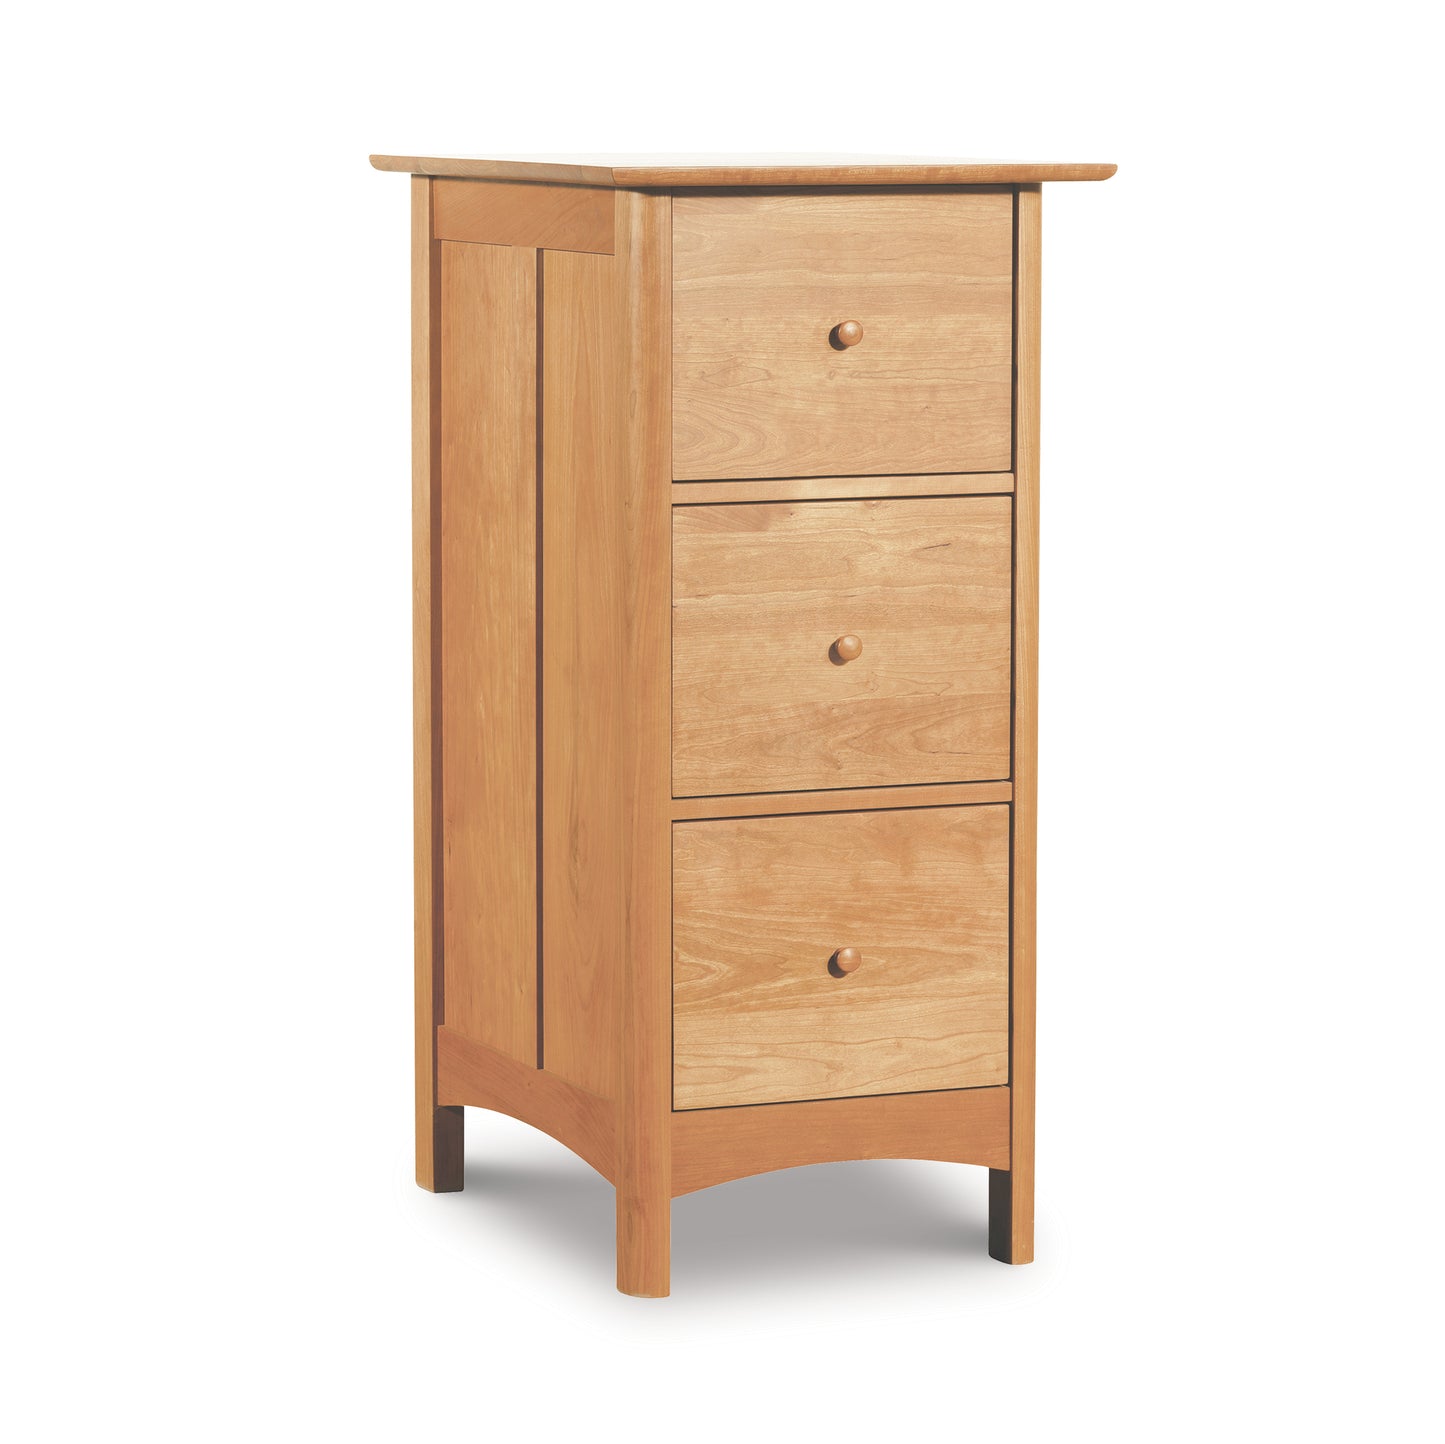 Heartwood Shaker 3-Drawer Vertical File Cabinet by Vermont Furniture Designs on a white background.